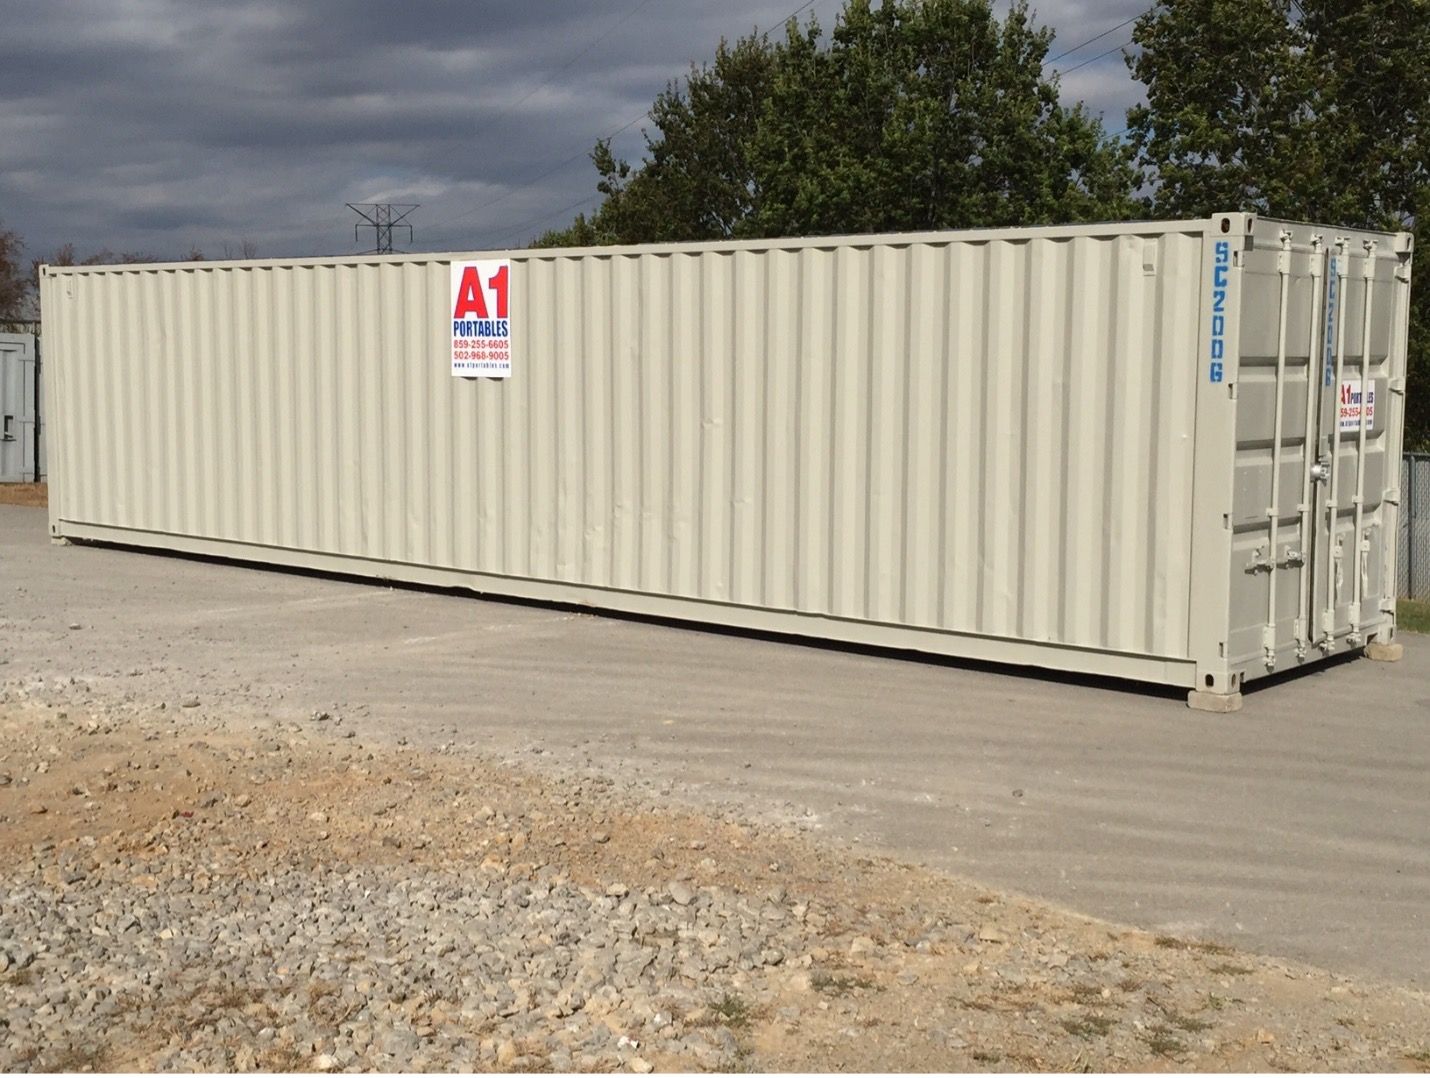 Storage Containers, Portable Storage Containers, Shipping Containers, Sea Crates, Conex Boxes, near Lexington, Kentucky (KY)